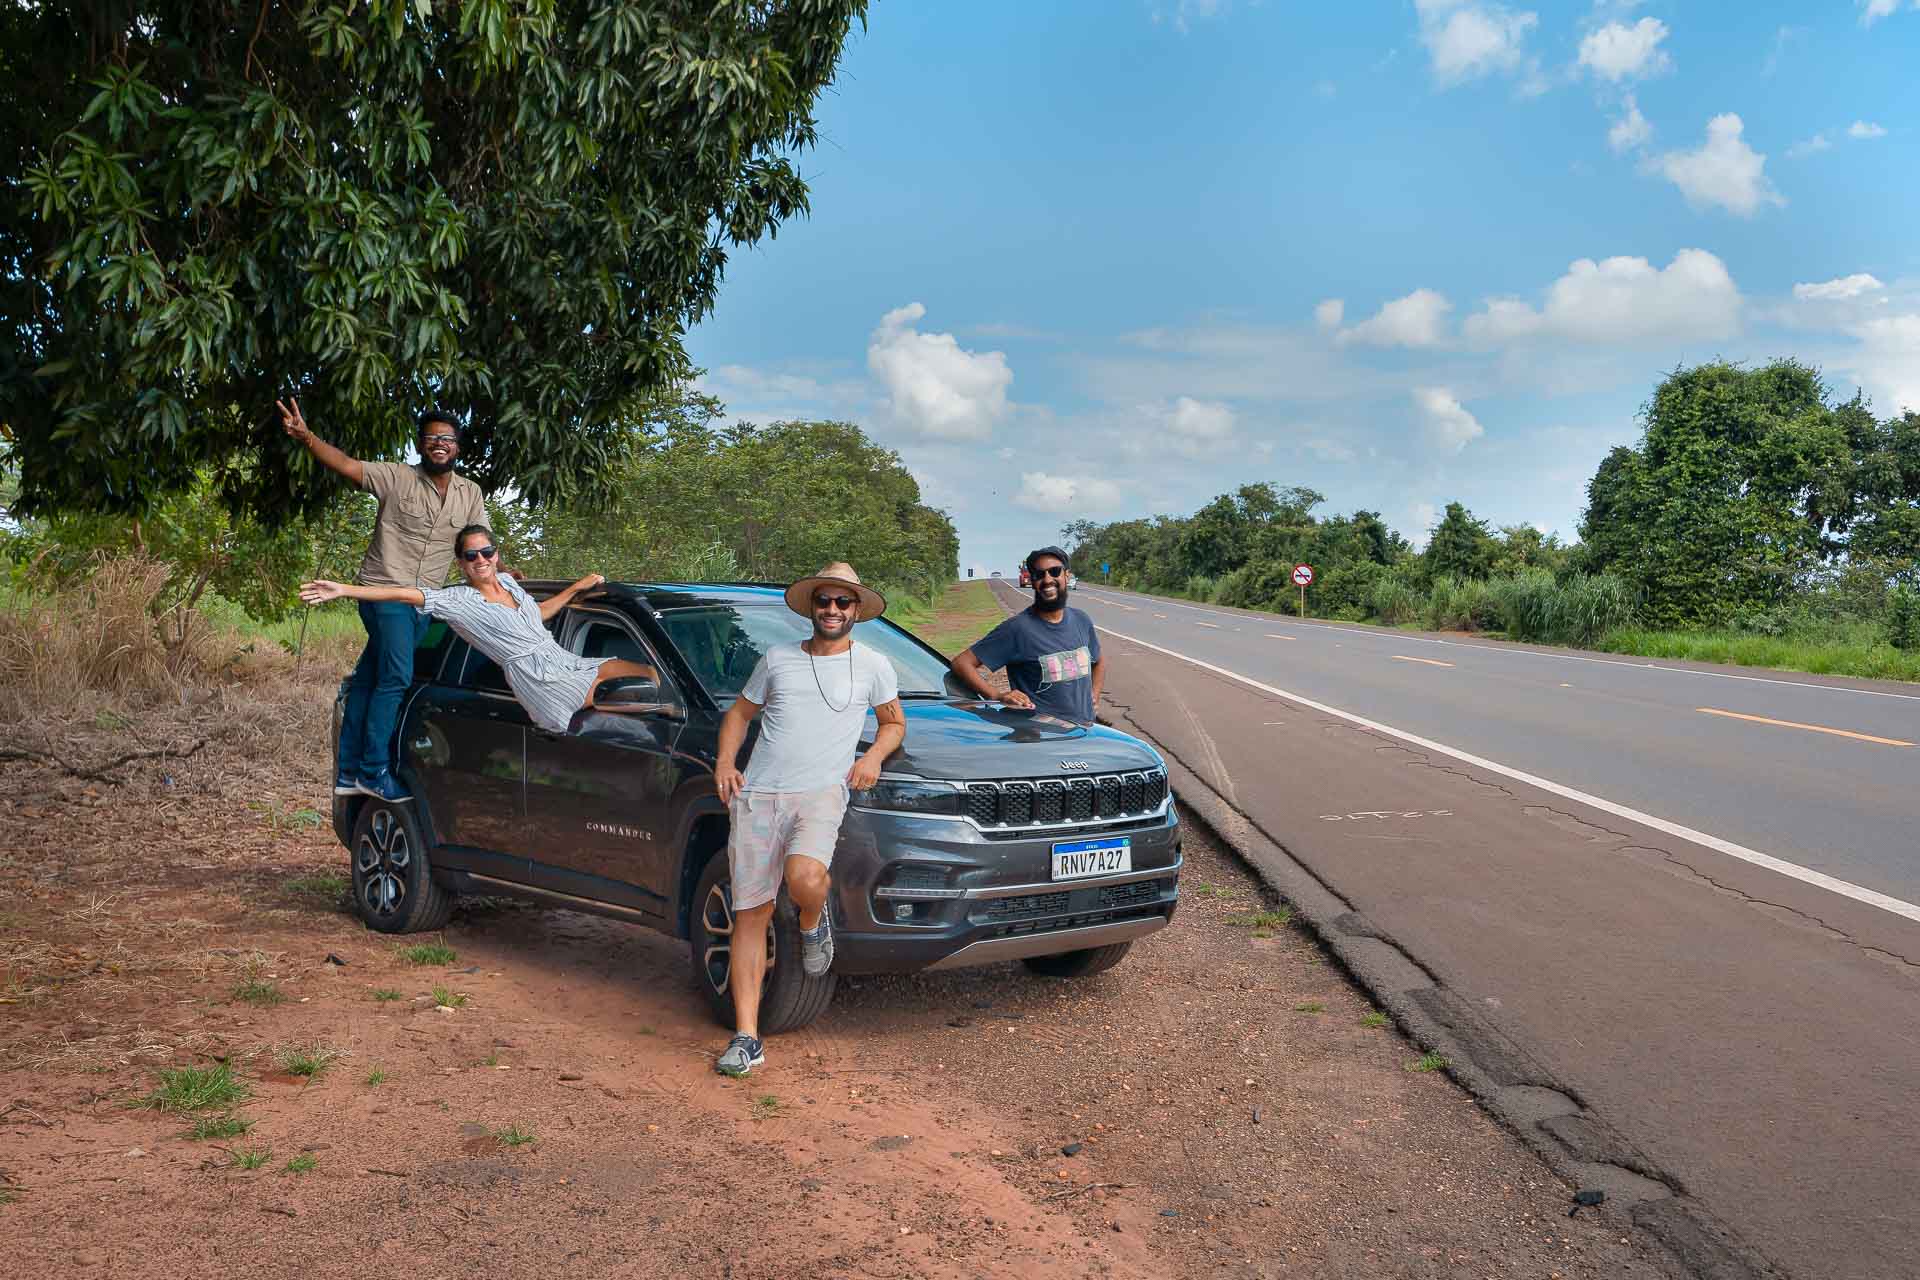 A car with monday feelings going to Pantanal in Brazil in the side of the motorway posing for a photo with friends